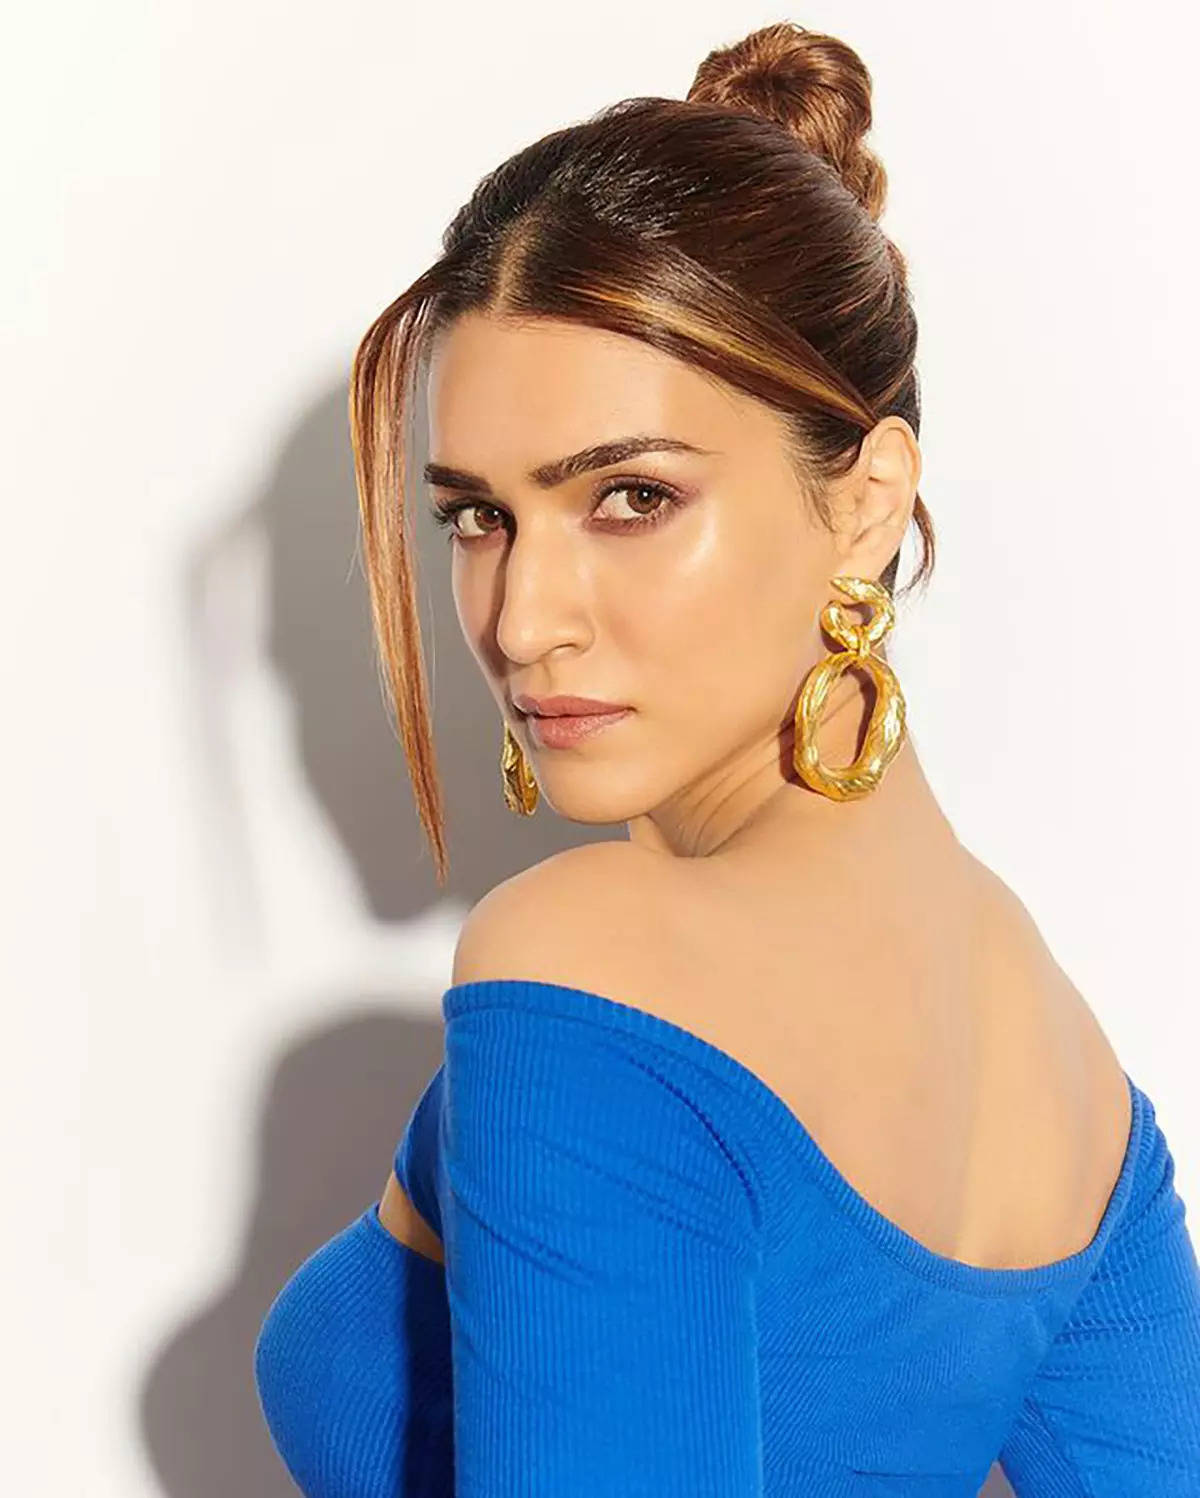 Kriti Sanon stuns in an array of stylish ensembles that will make you crave for more